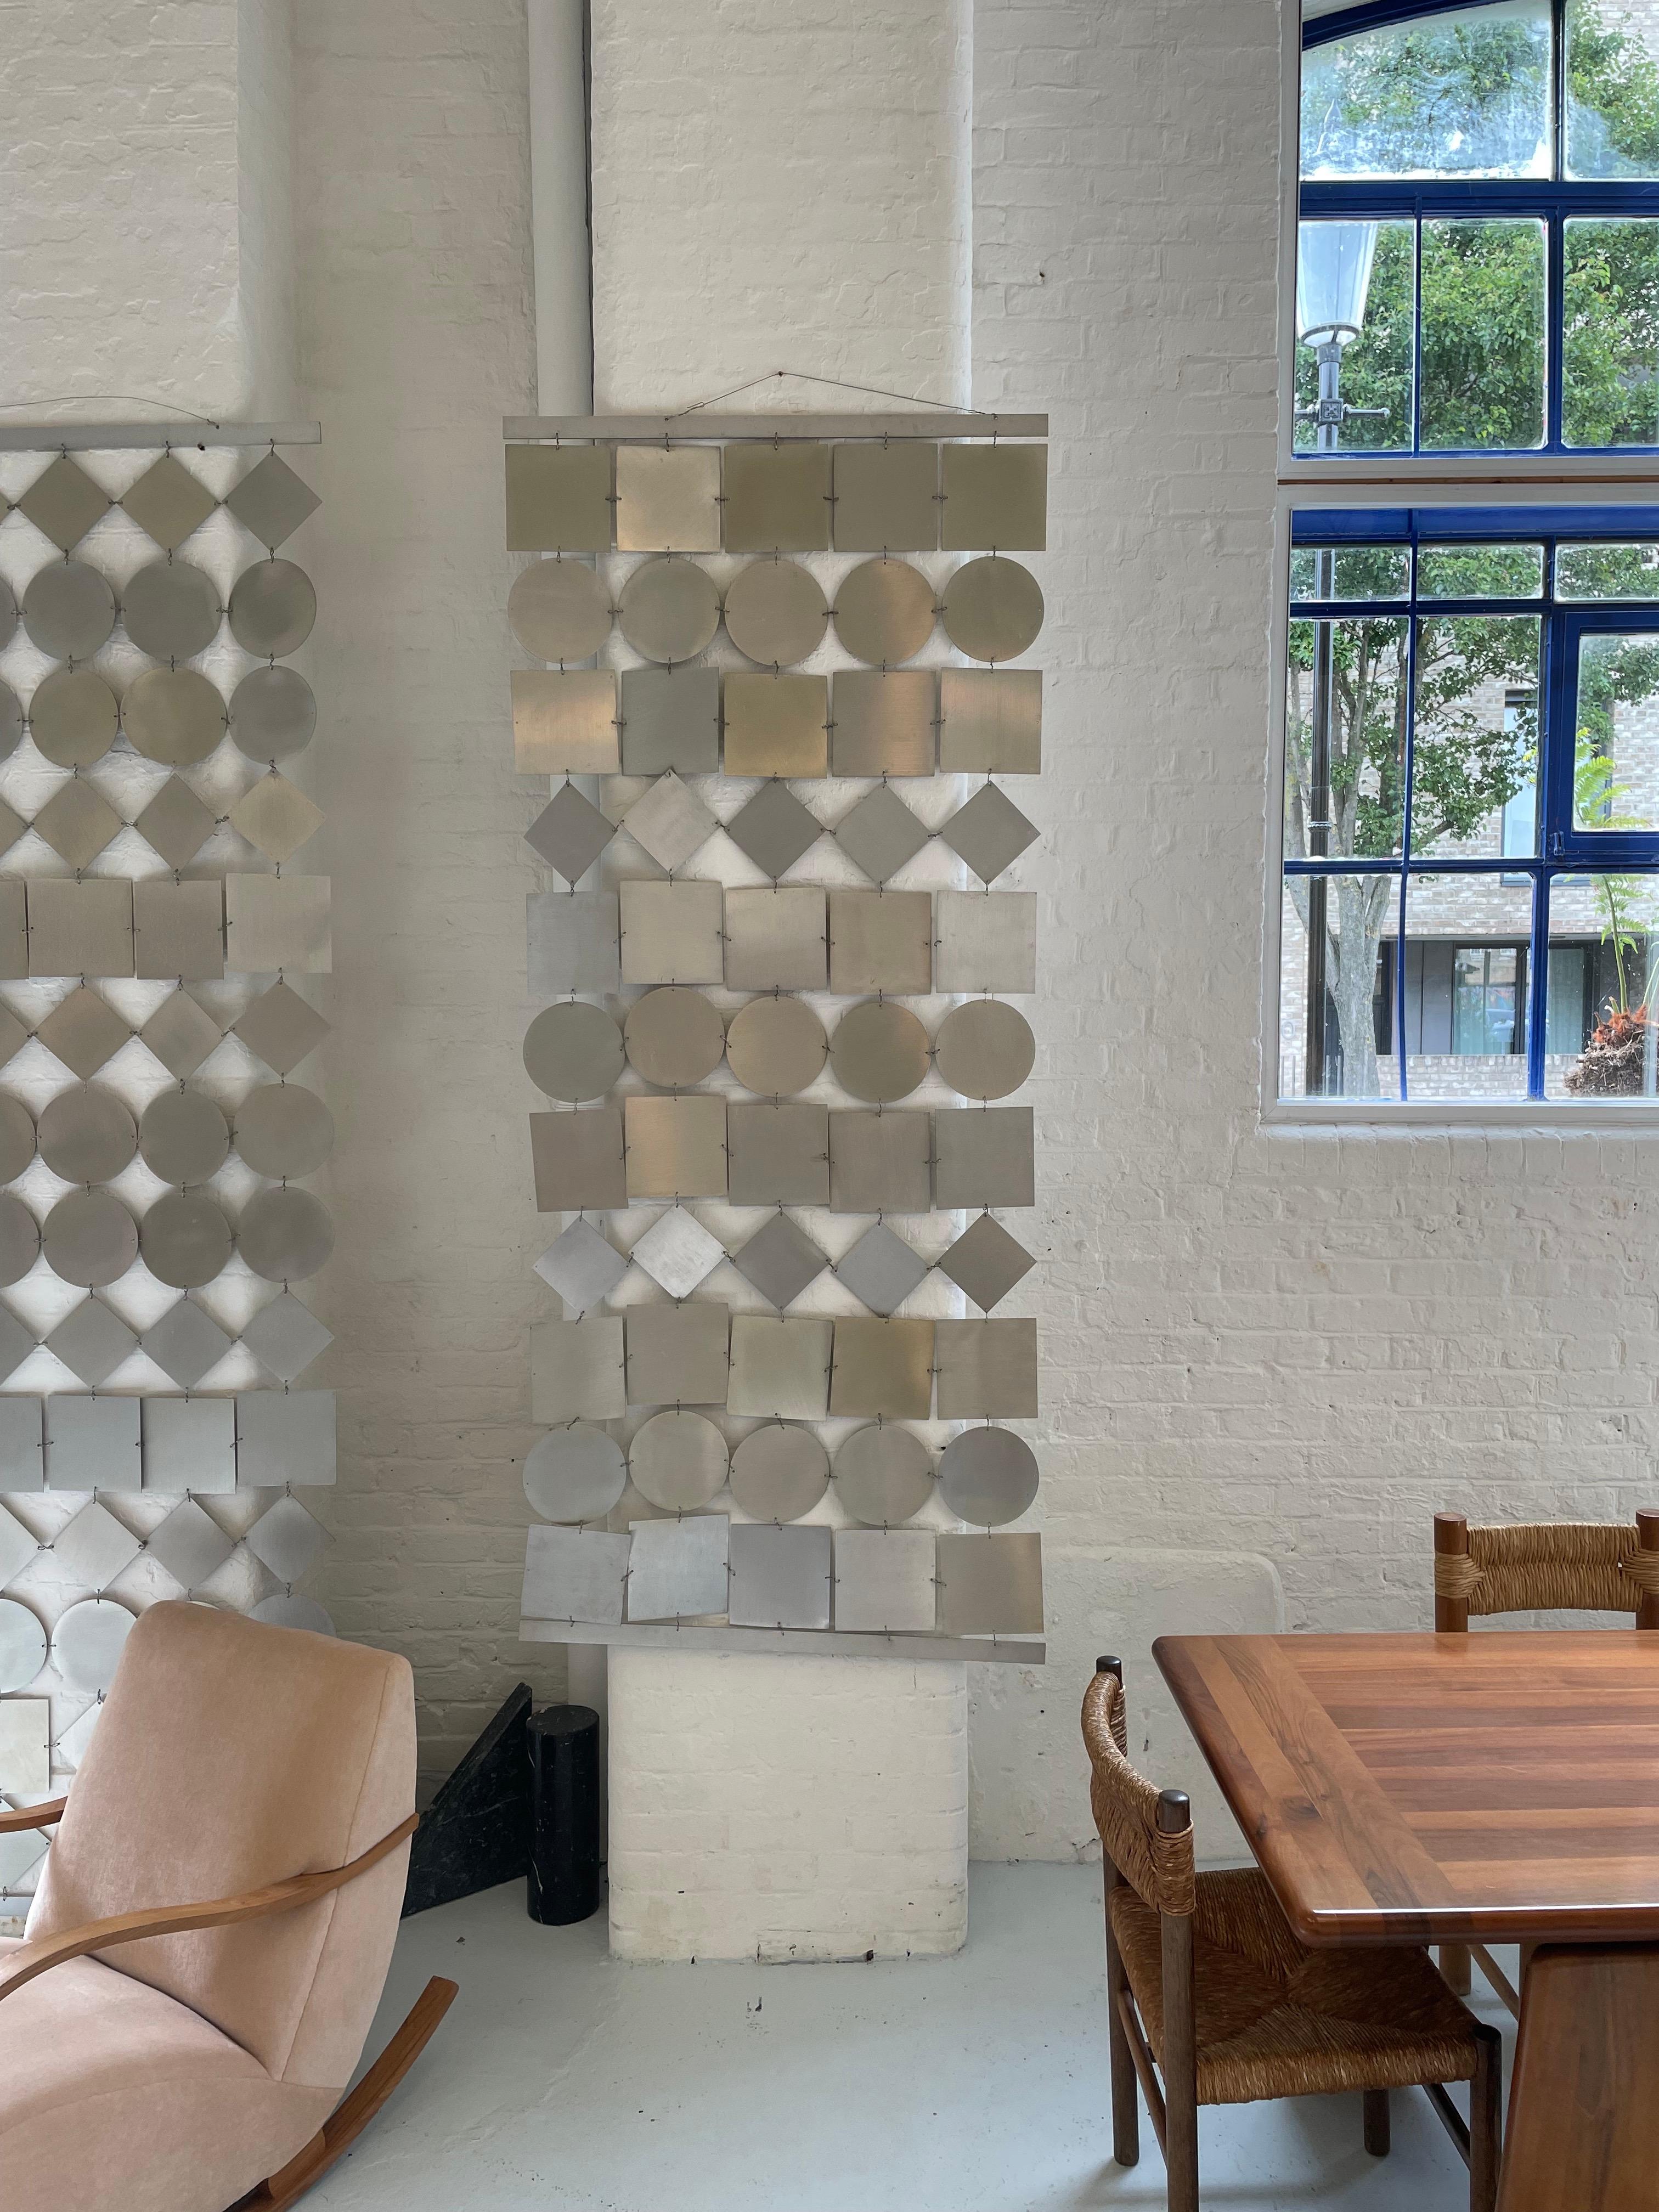 Made from Brushed Steel in the 1970s. The Geometric Screen/Room Divider is an ideal addition to modern, contemporary, or even eclectic interiors, as it adds a touch of sophistication, structure, and visual depth to any room.